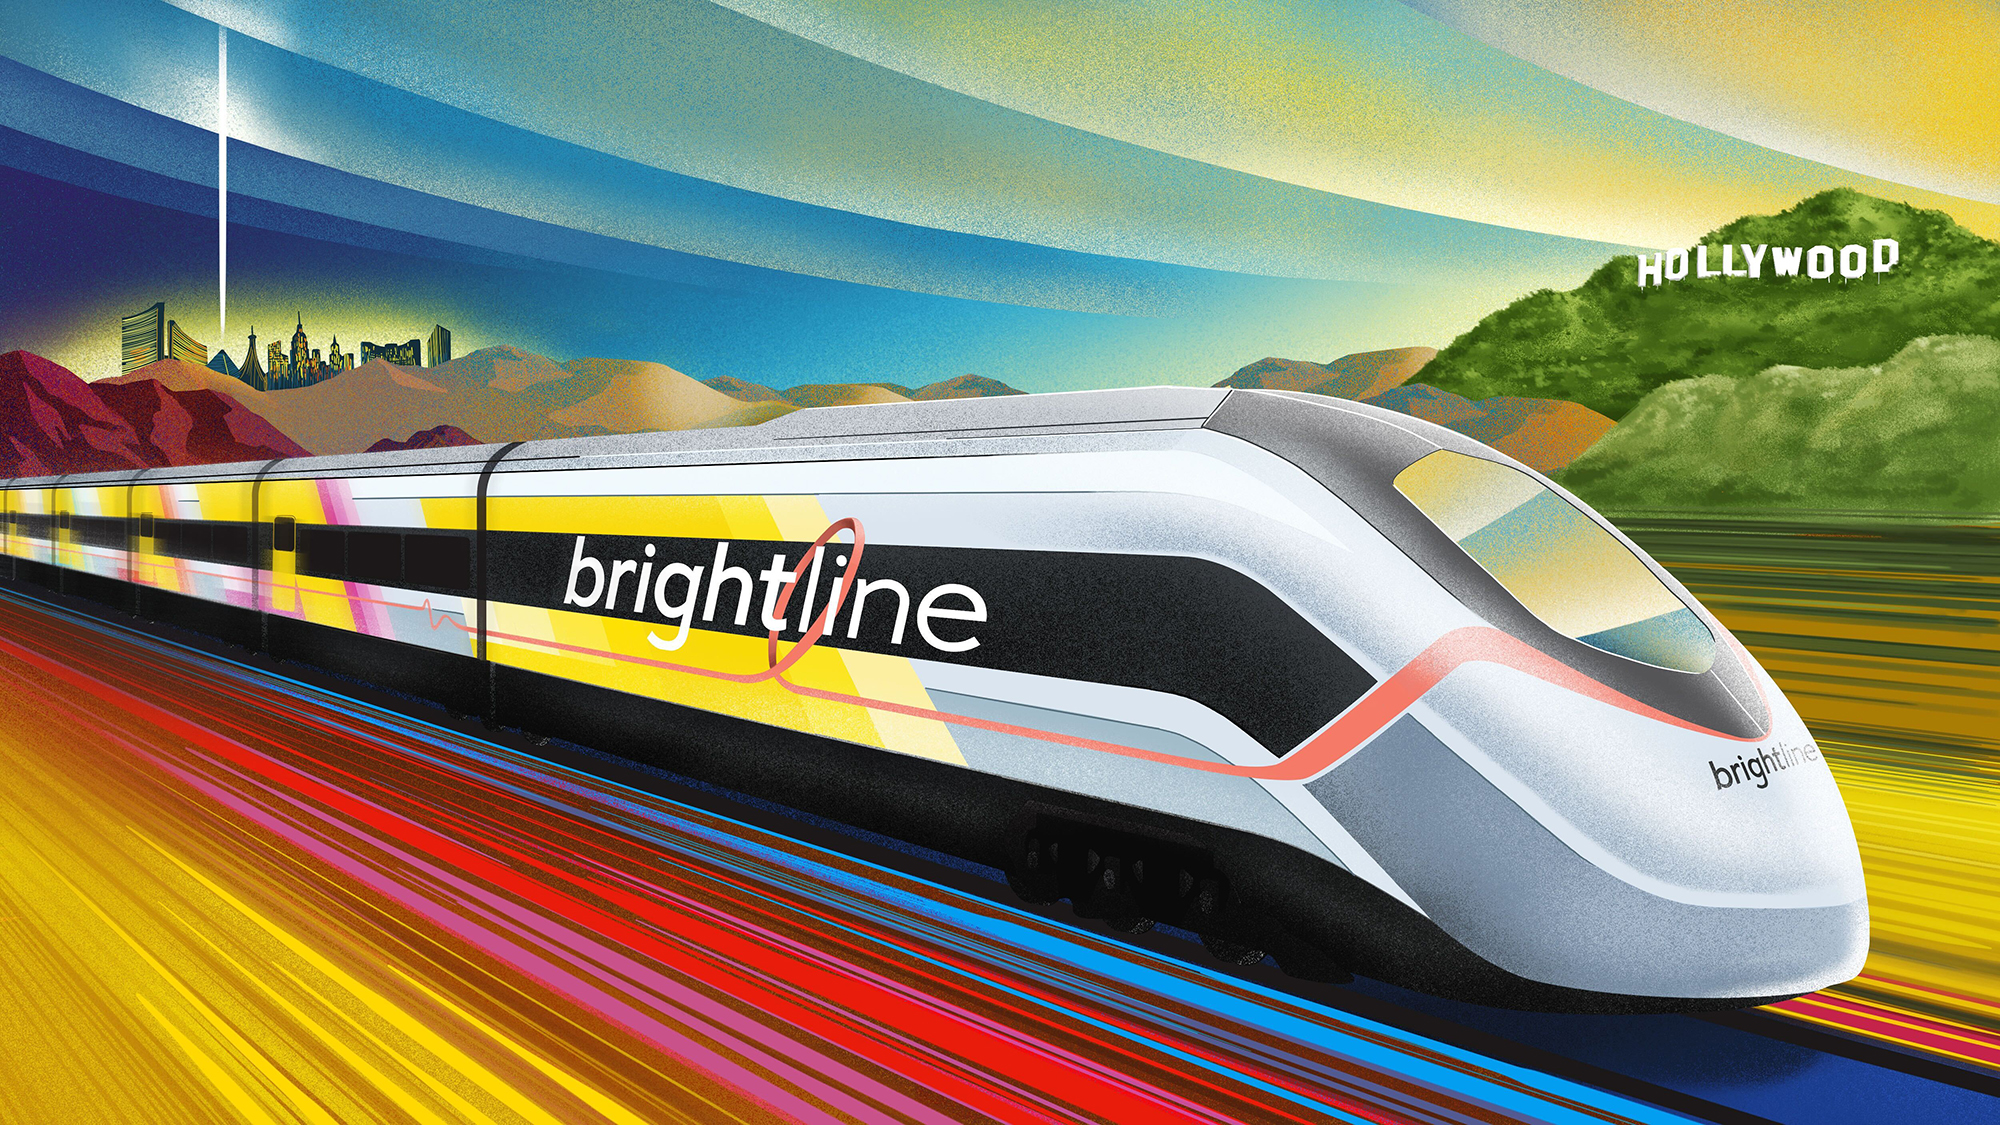 When it’s completed, Brightline estimates its $12 billion high-speed rail could take travelers from Las Vegas to Los Angeles in just over two hours.